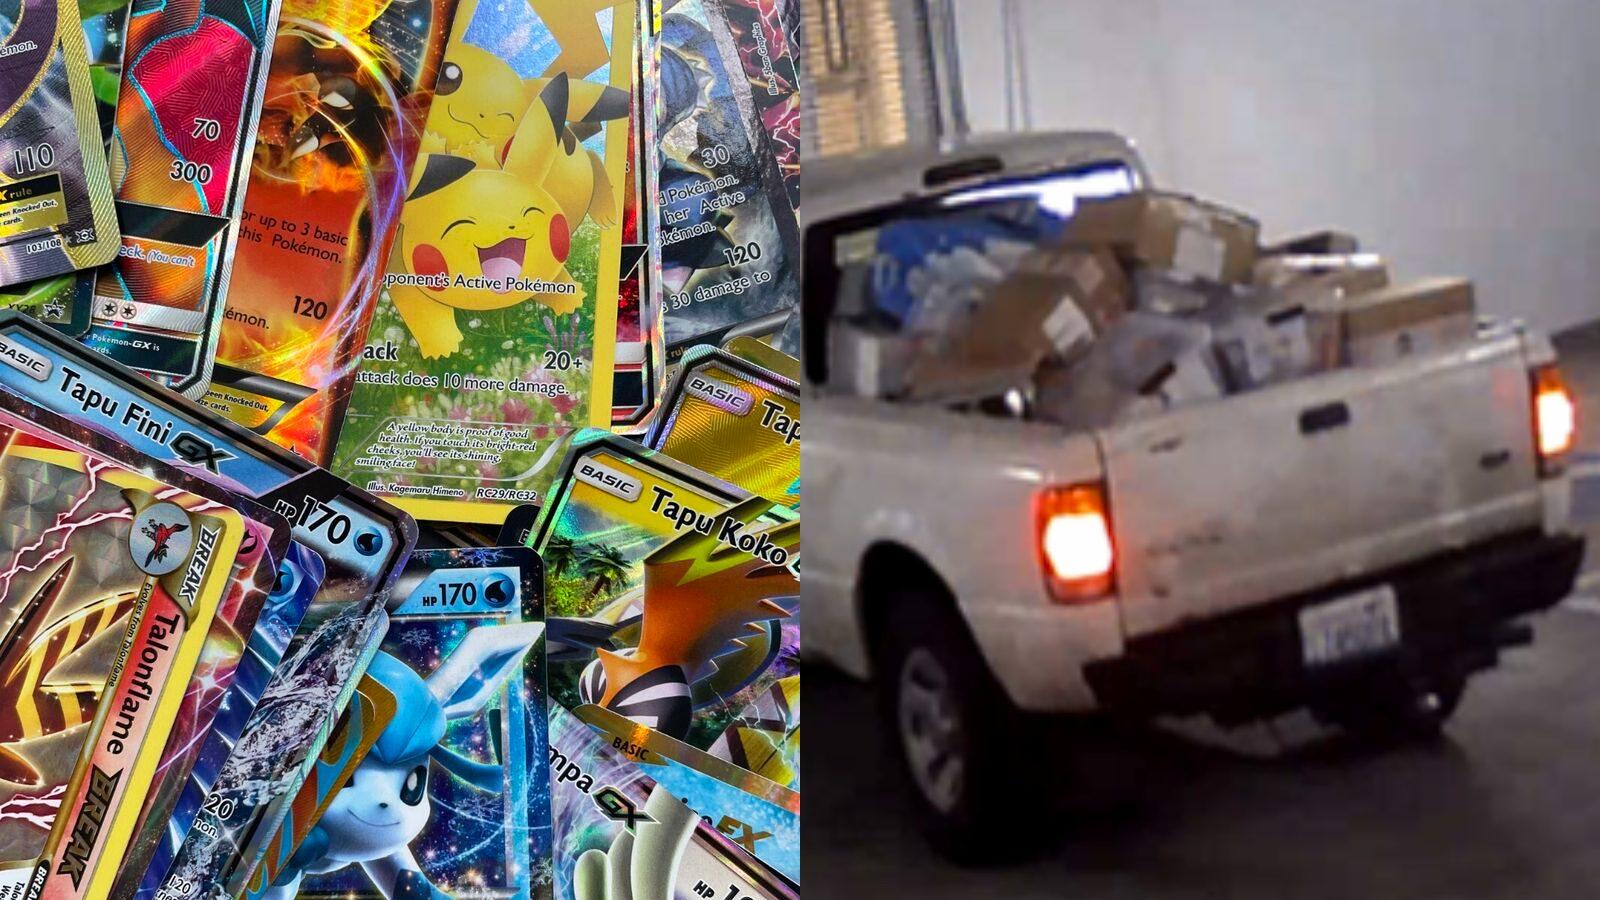 Pokemon cards and pick-up truck filled with stolen cards.